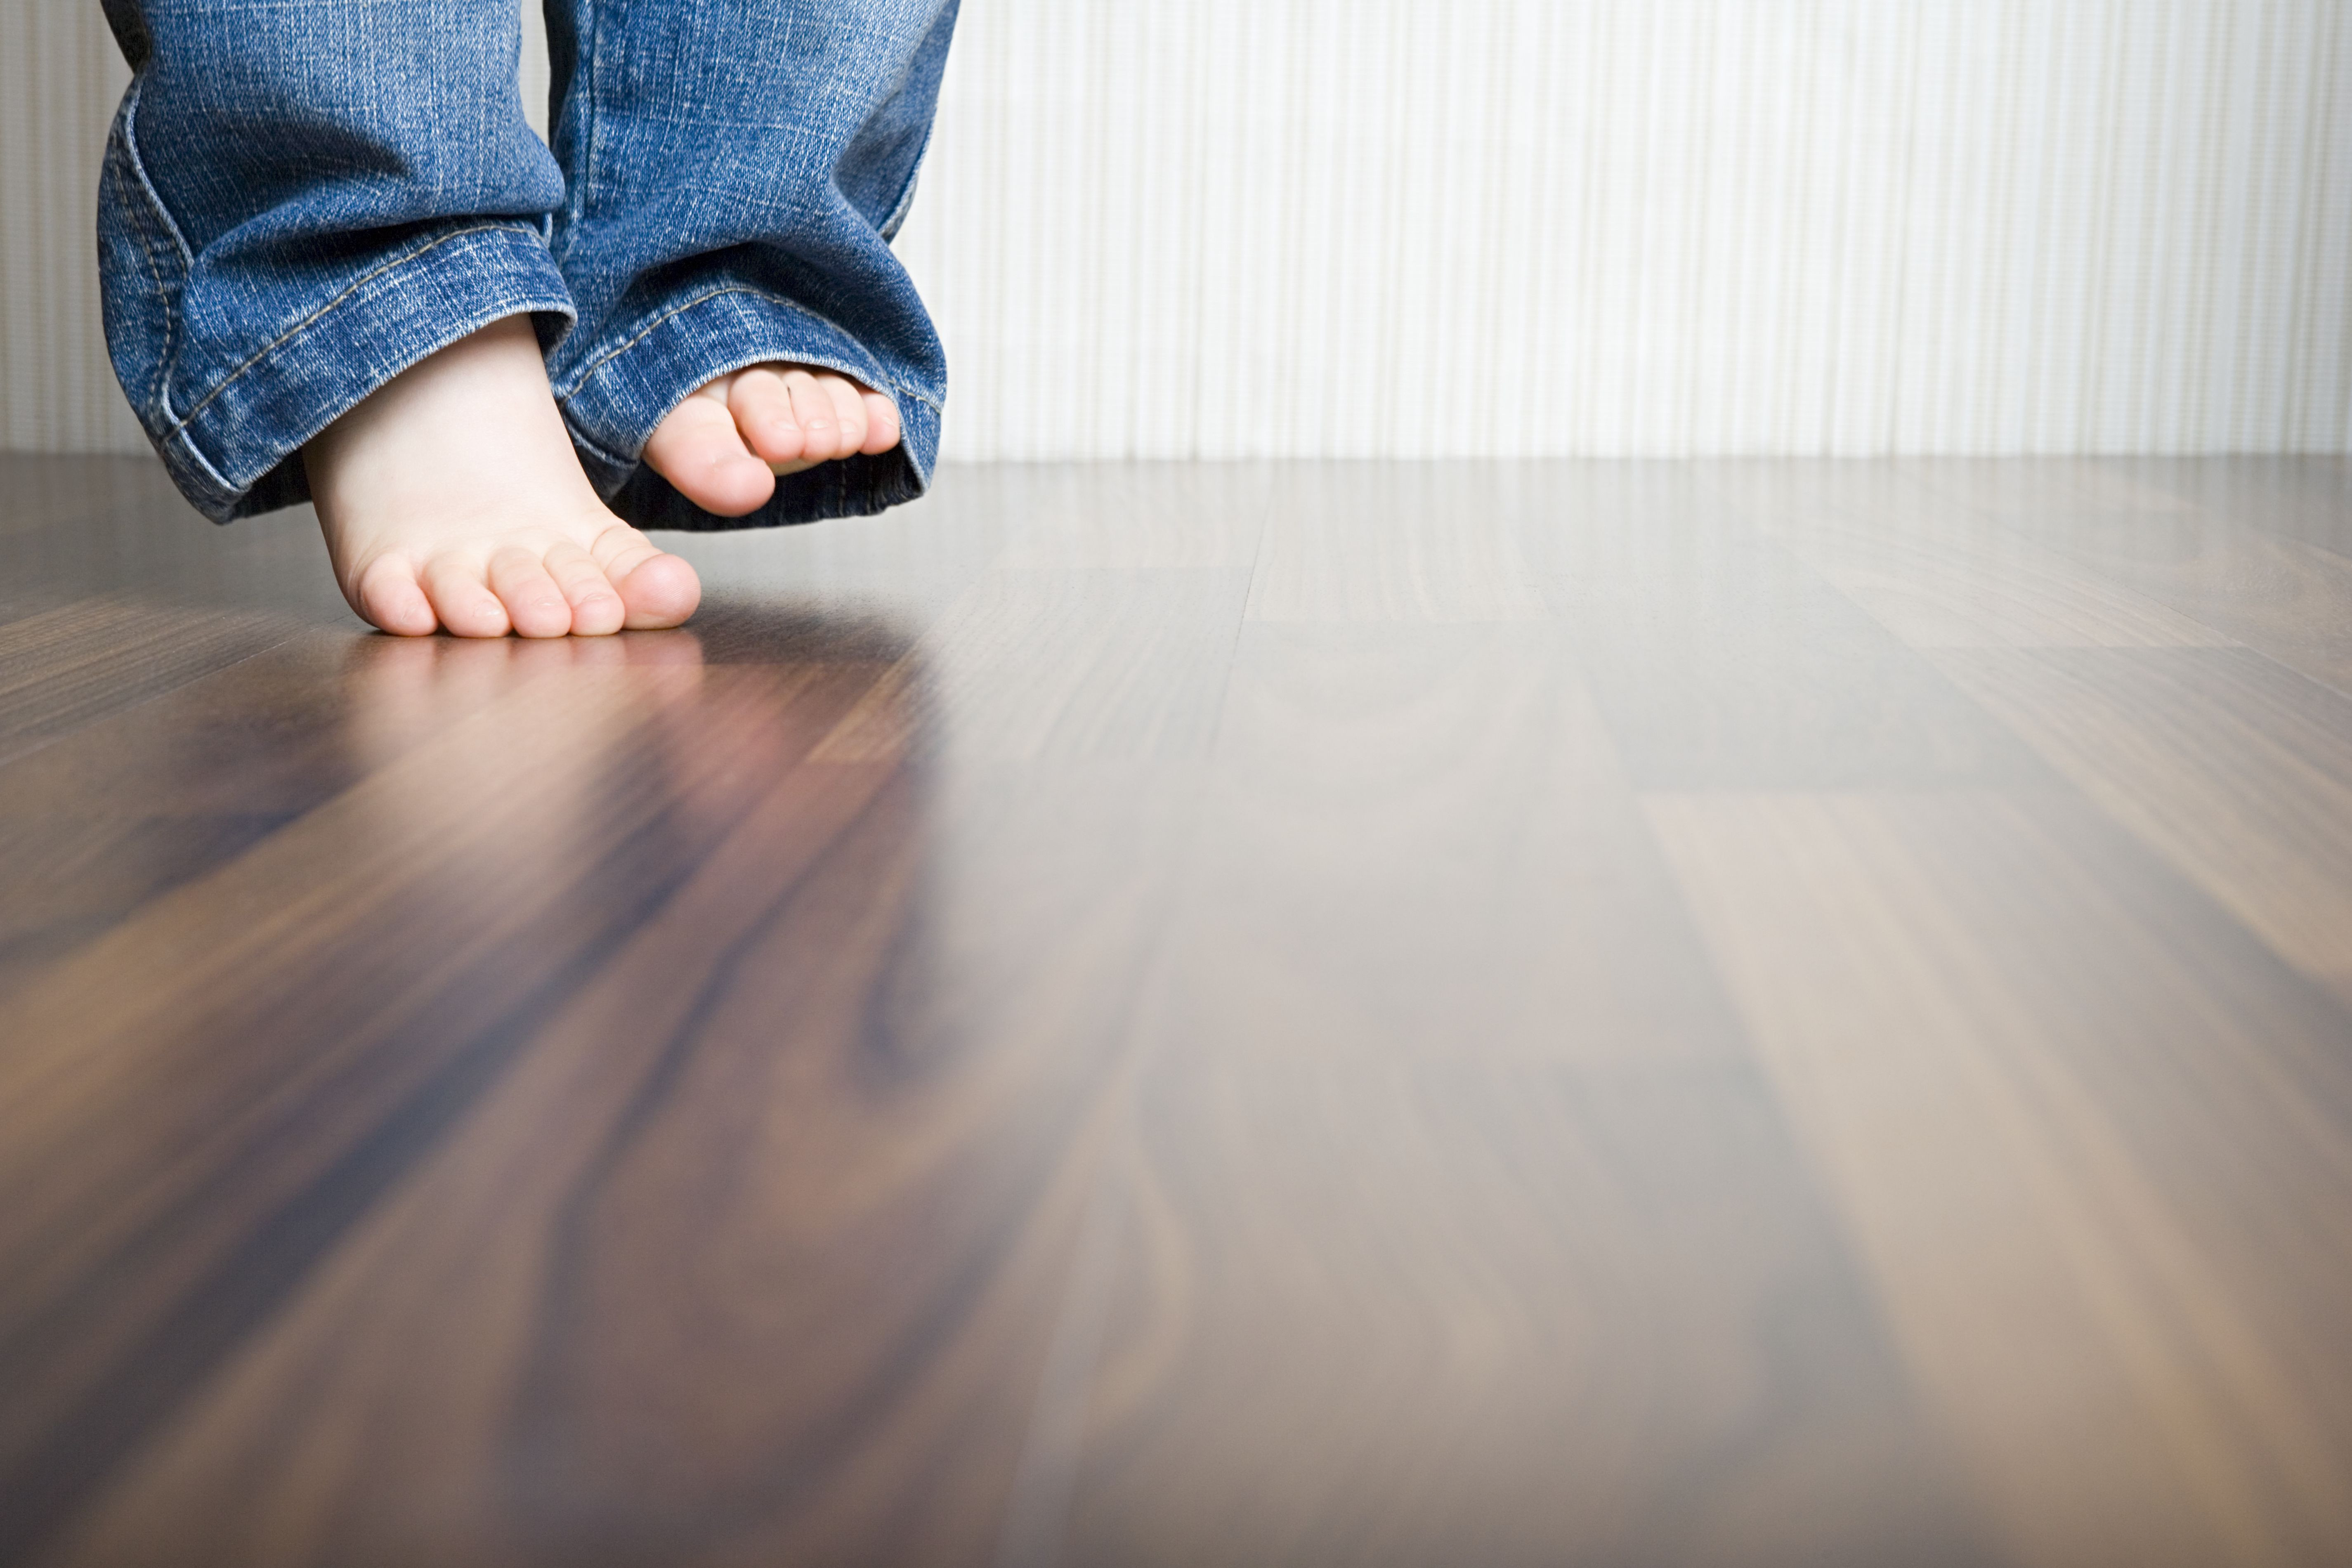 Professional Hardwood Floor Cleaning Service Of How to Clean Hardwood Floors Best Way to Clean Wood Flooring within 1512149908 Gettyimages 75403973